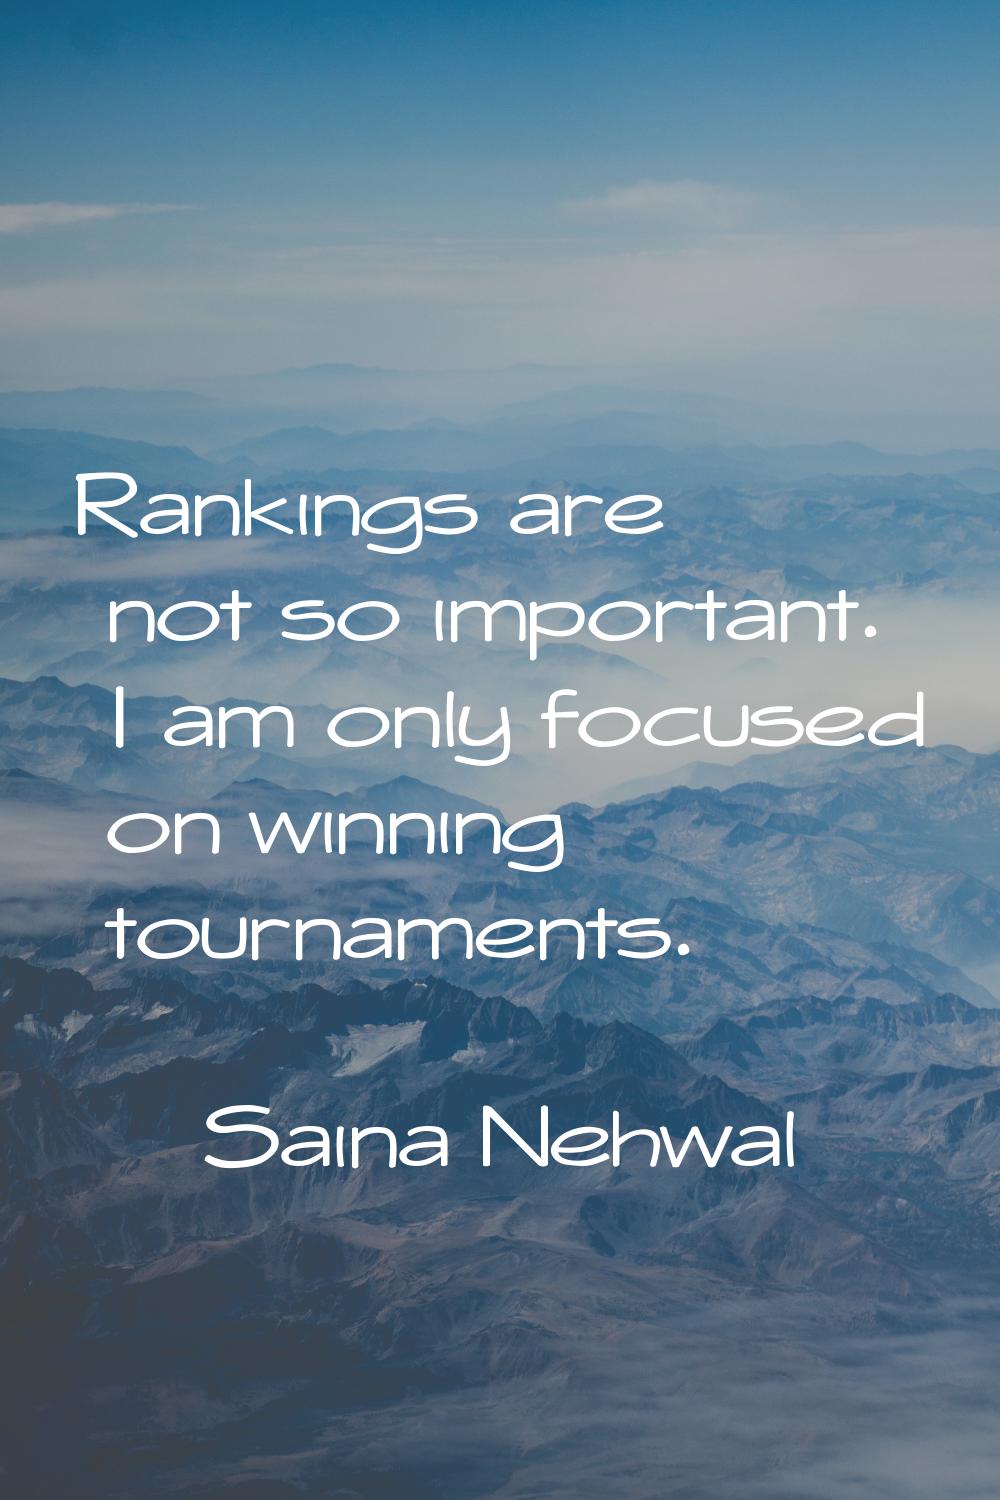 Rankings are not so important. I am only focused on winning tournaments.